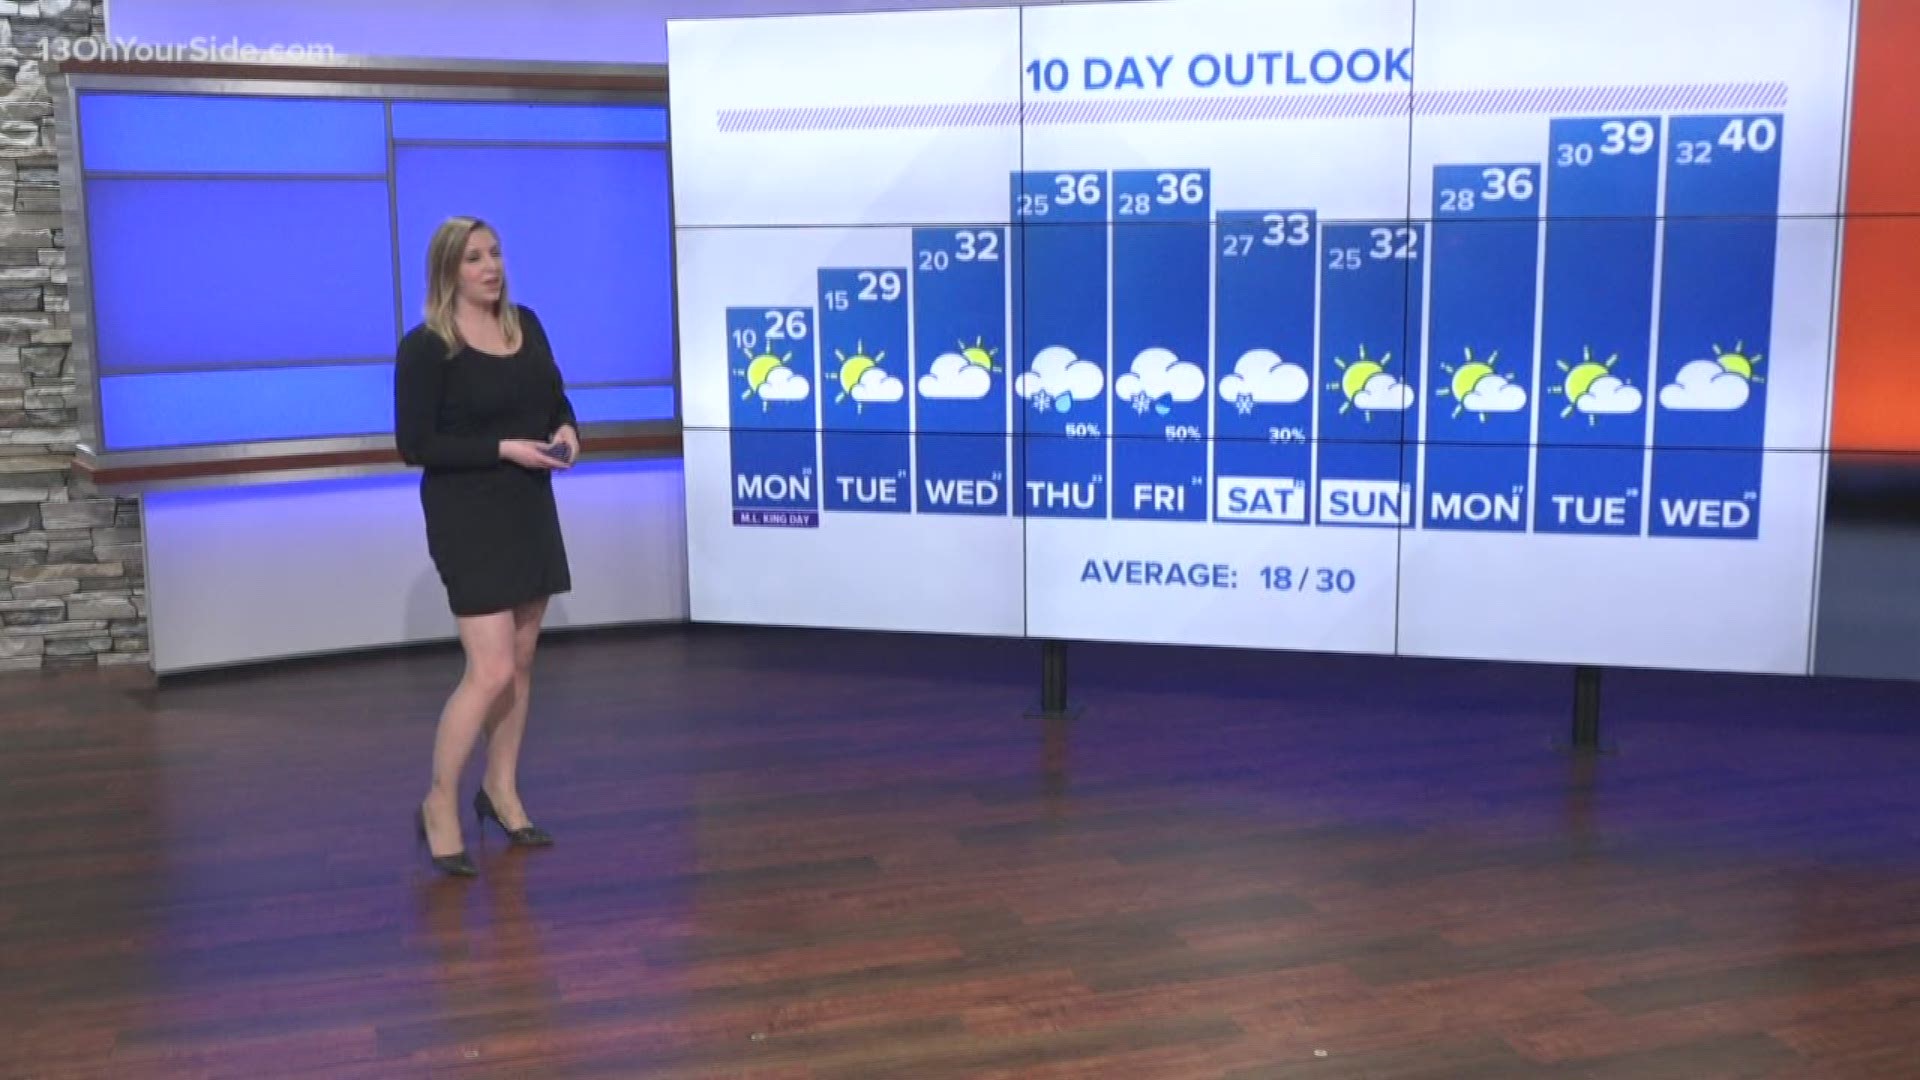 13 On Your Side Forecast: A break from the snow